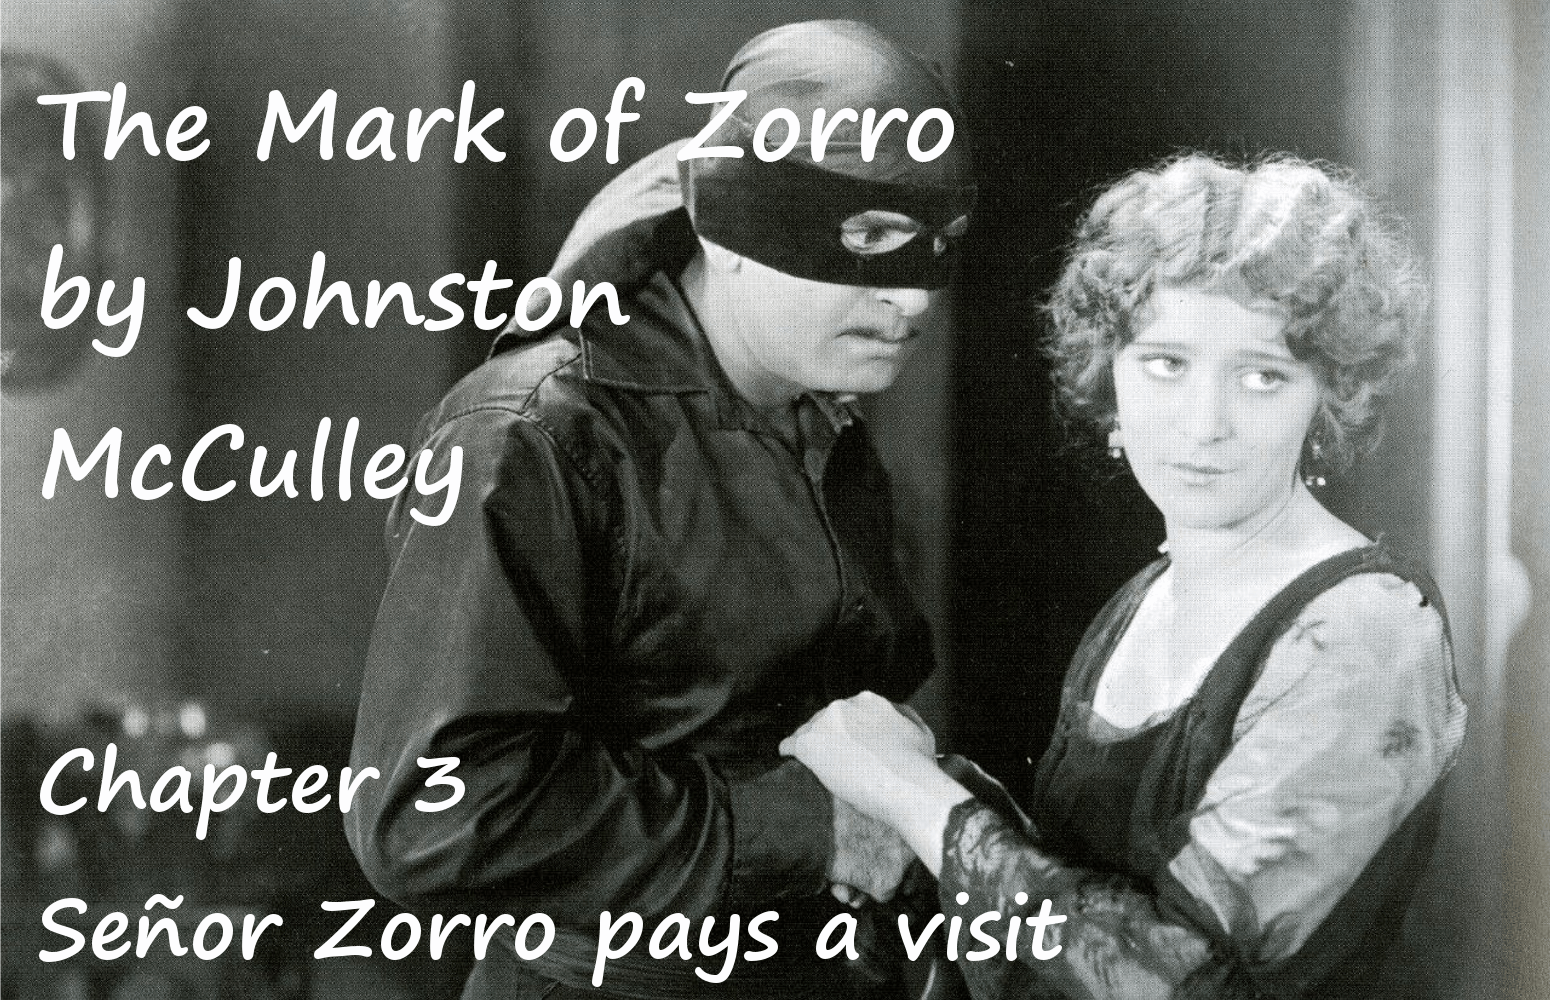 The Mark of Zorro chapter 3 Señor Zorro pays a visit by Johnston McCulley